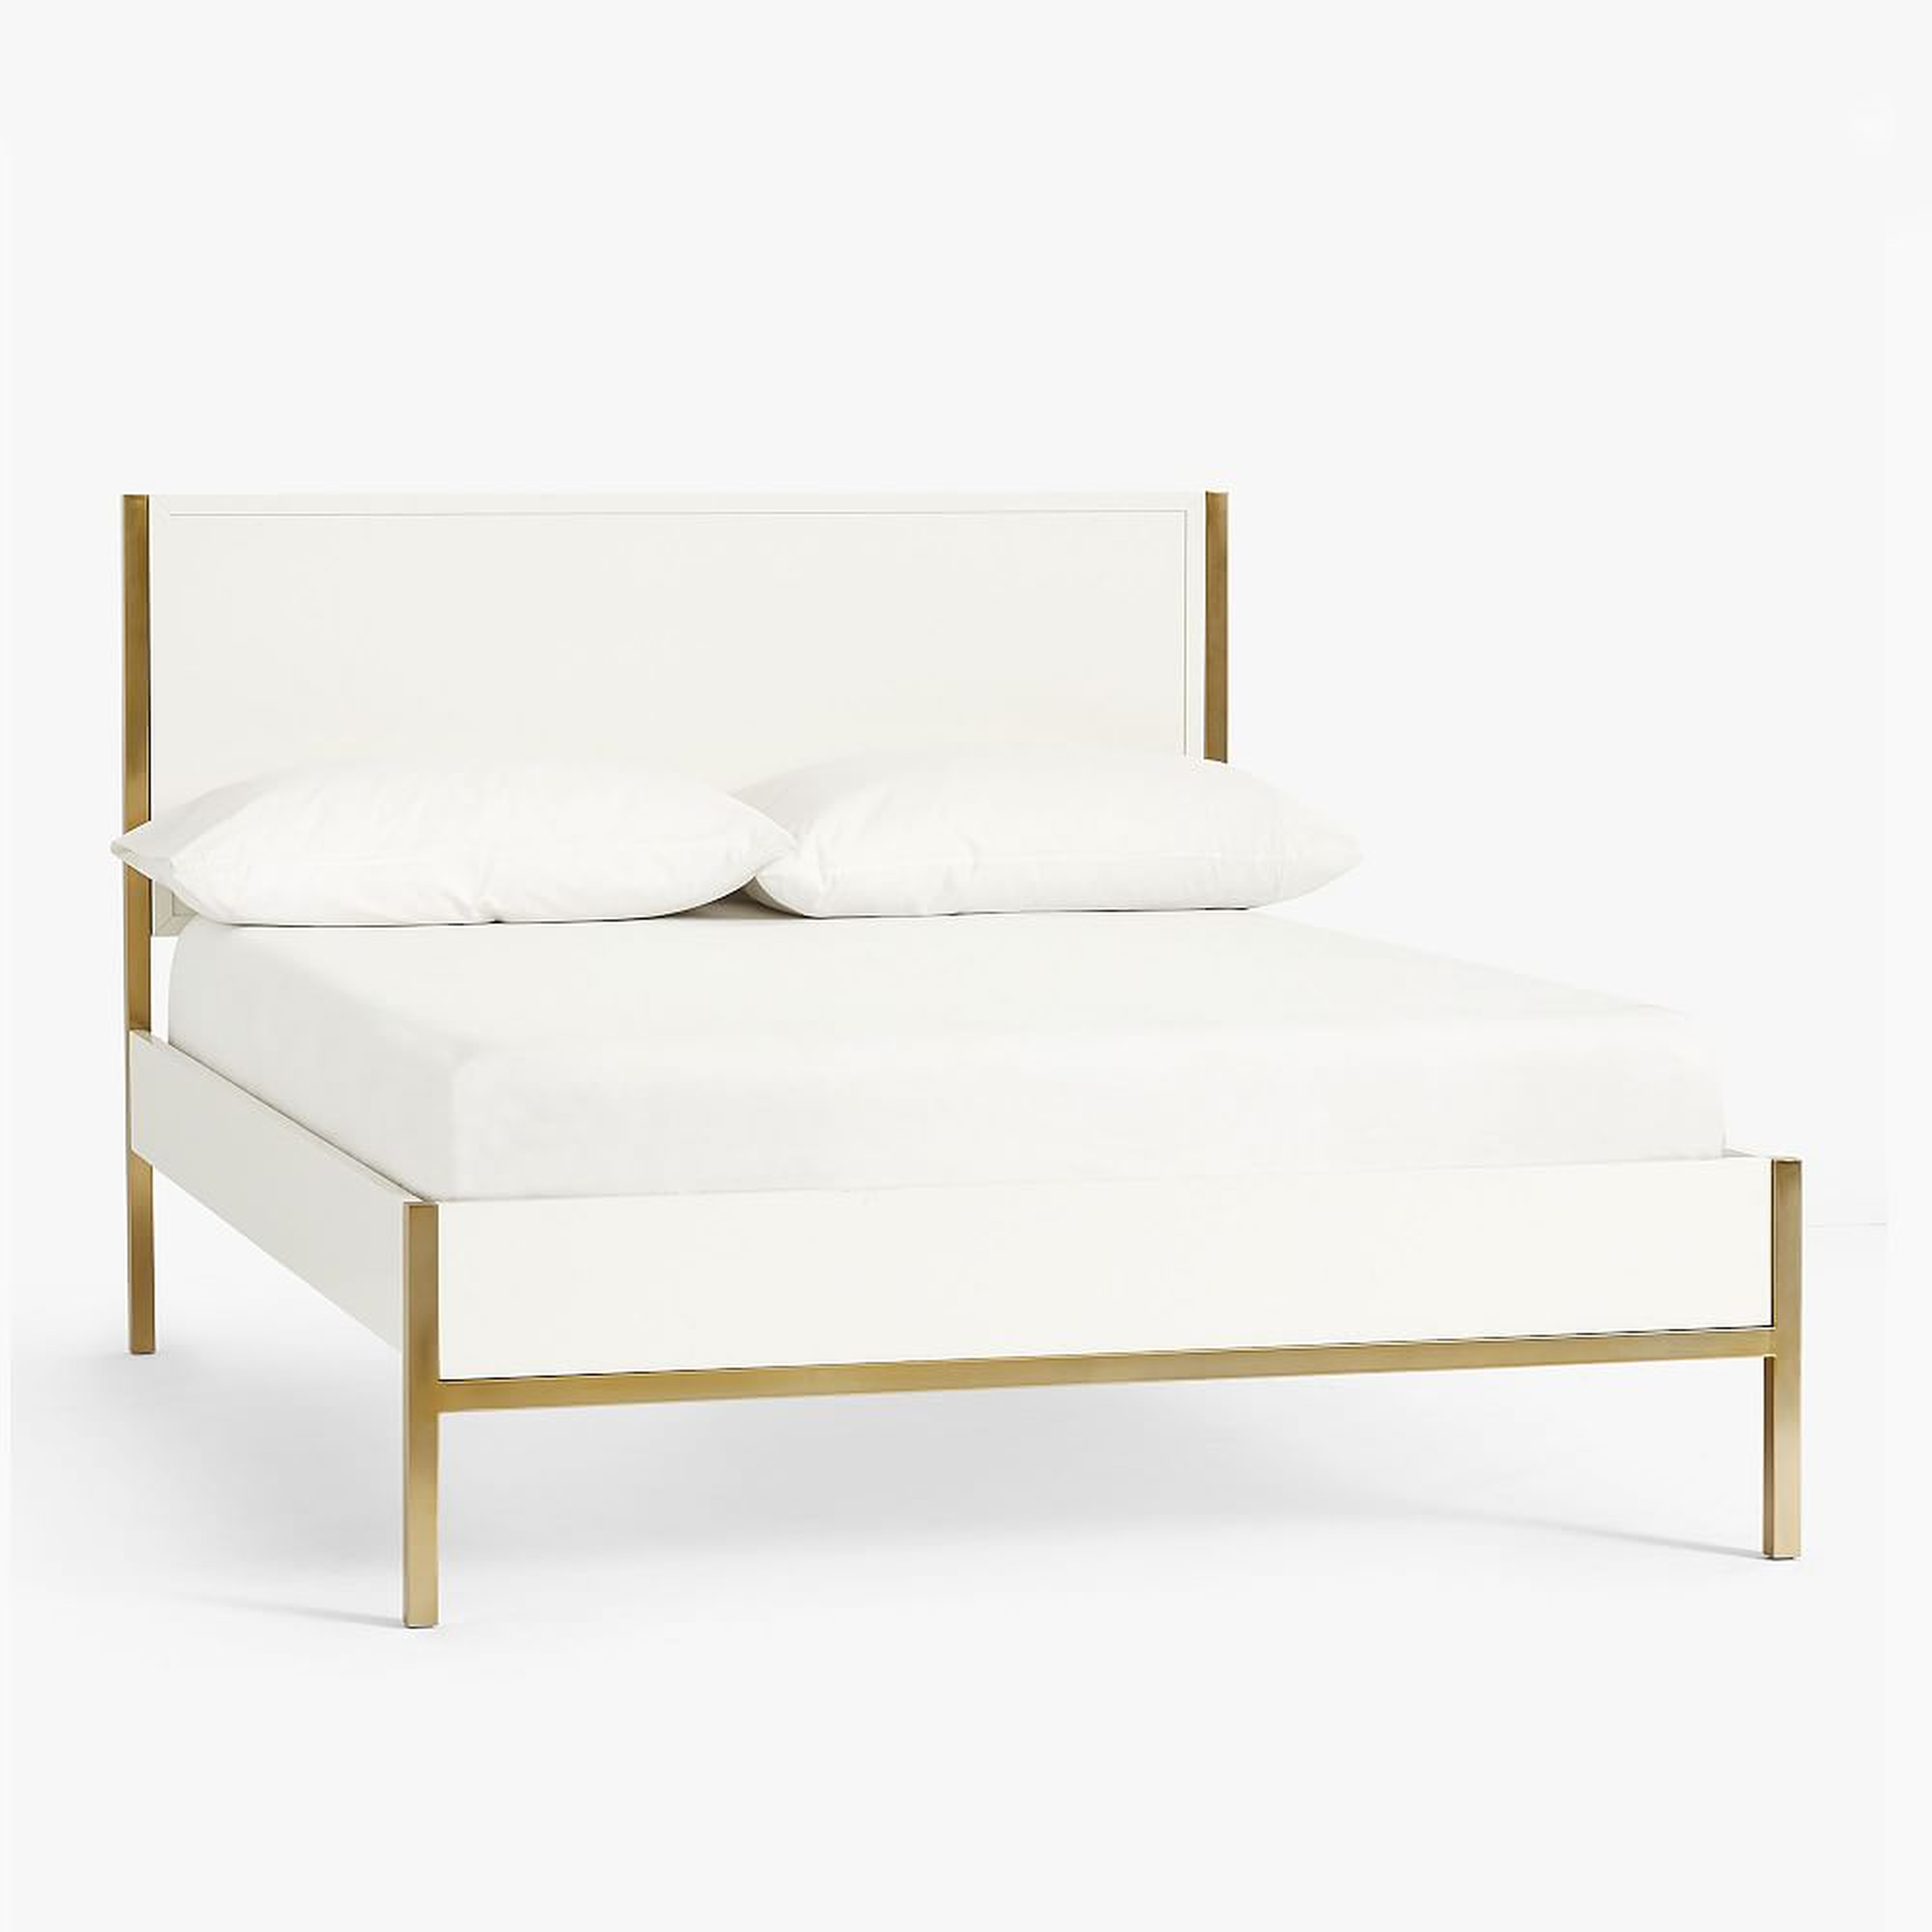 Blaire Classic Platform Bed, Full, Simply White - Pottery Barn Teen